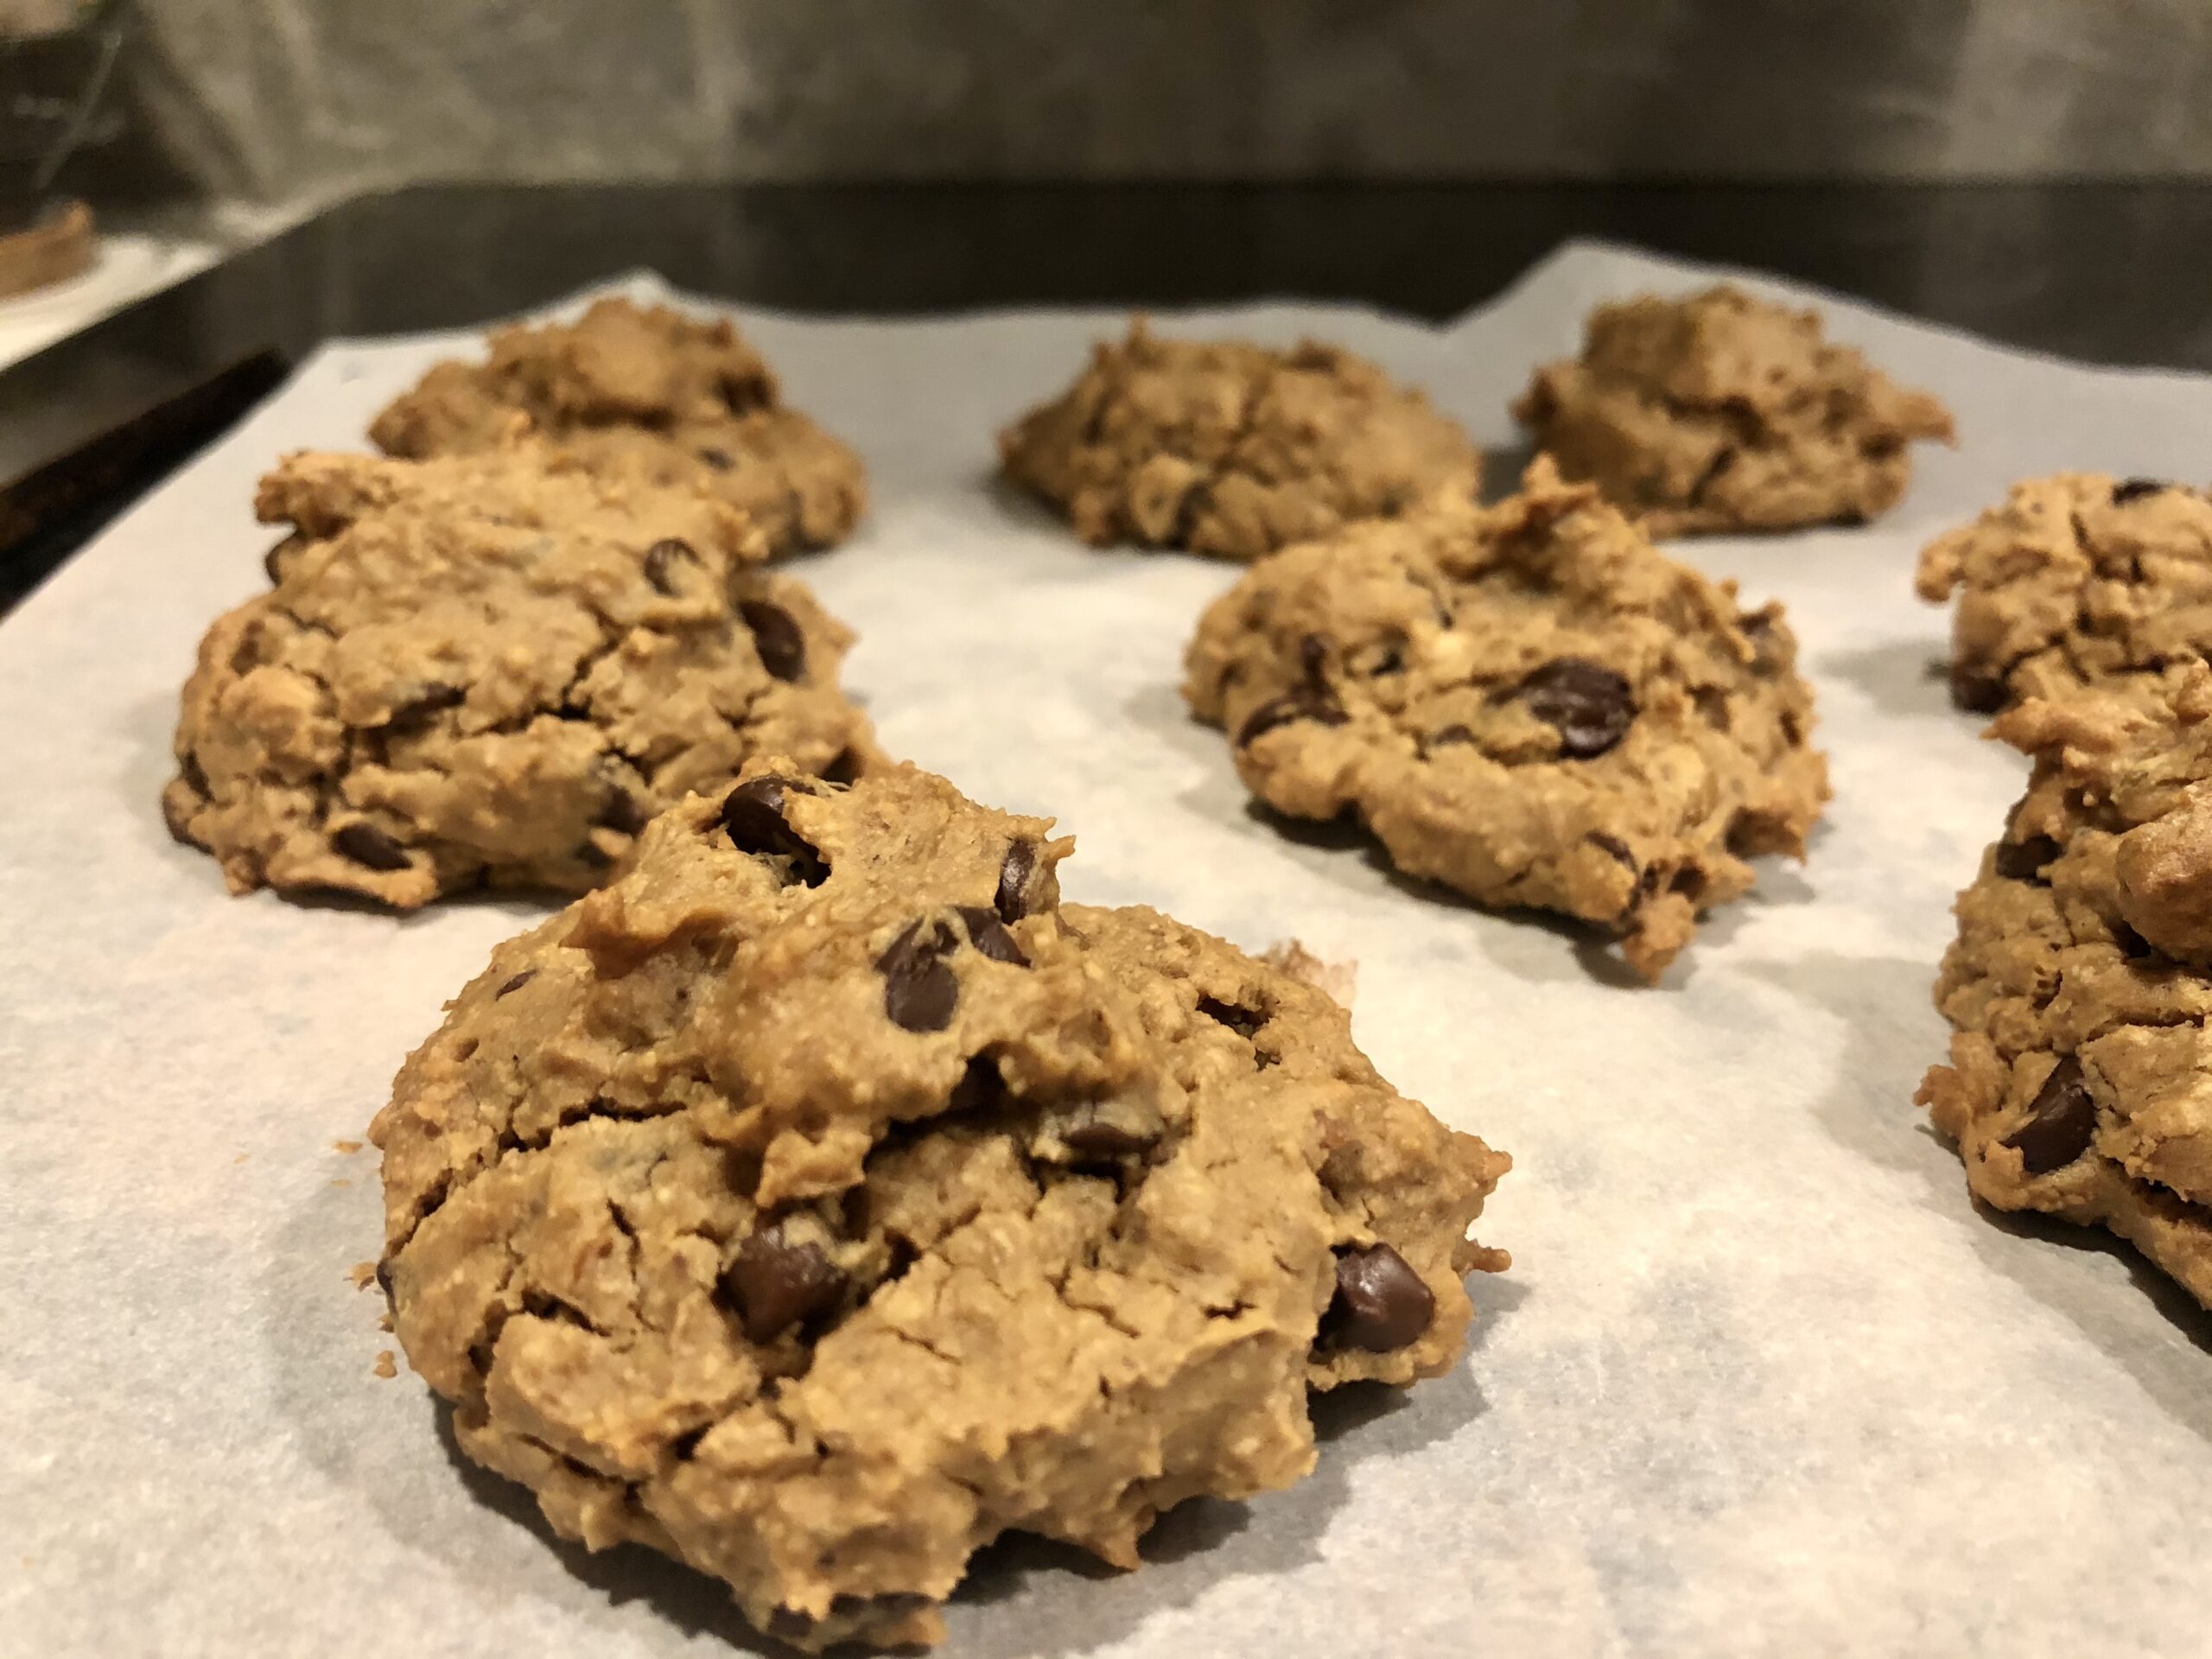 Chocolate chip cookies lying on parchment paper on the stovetop.